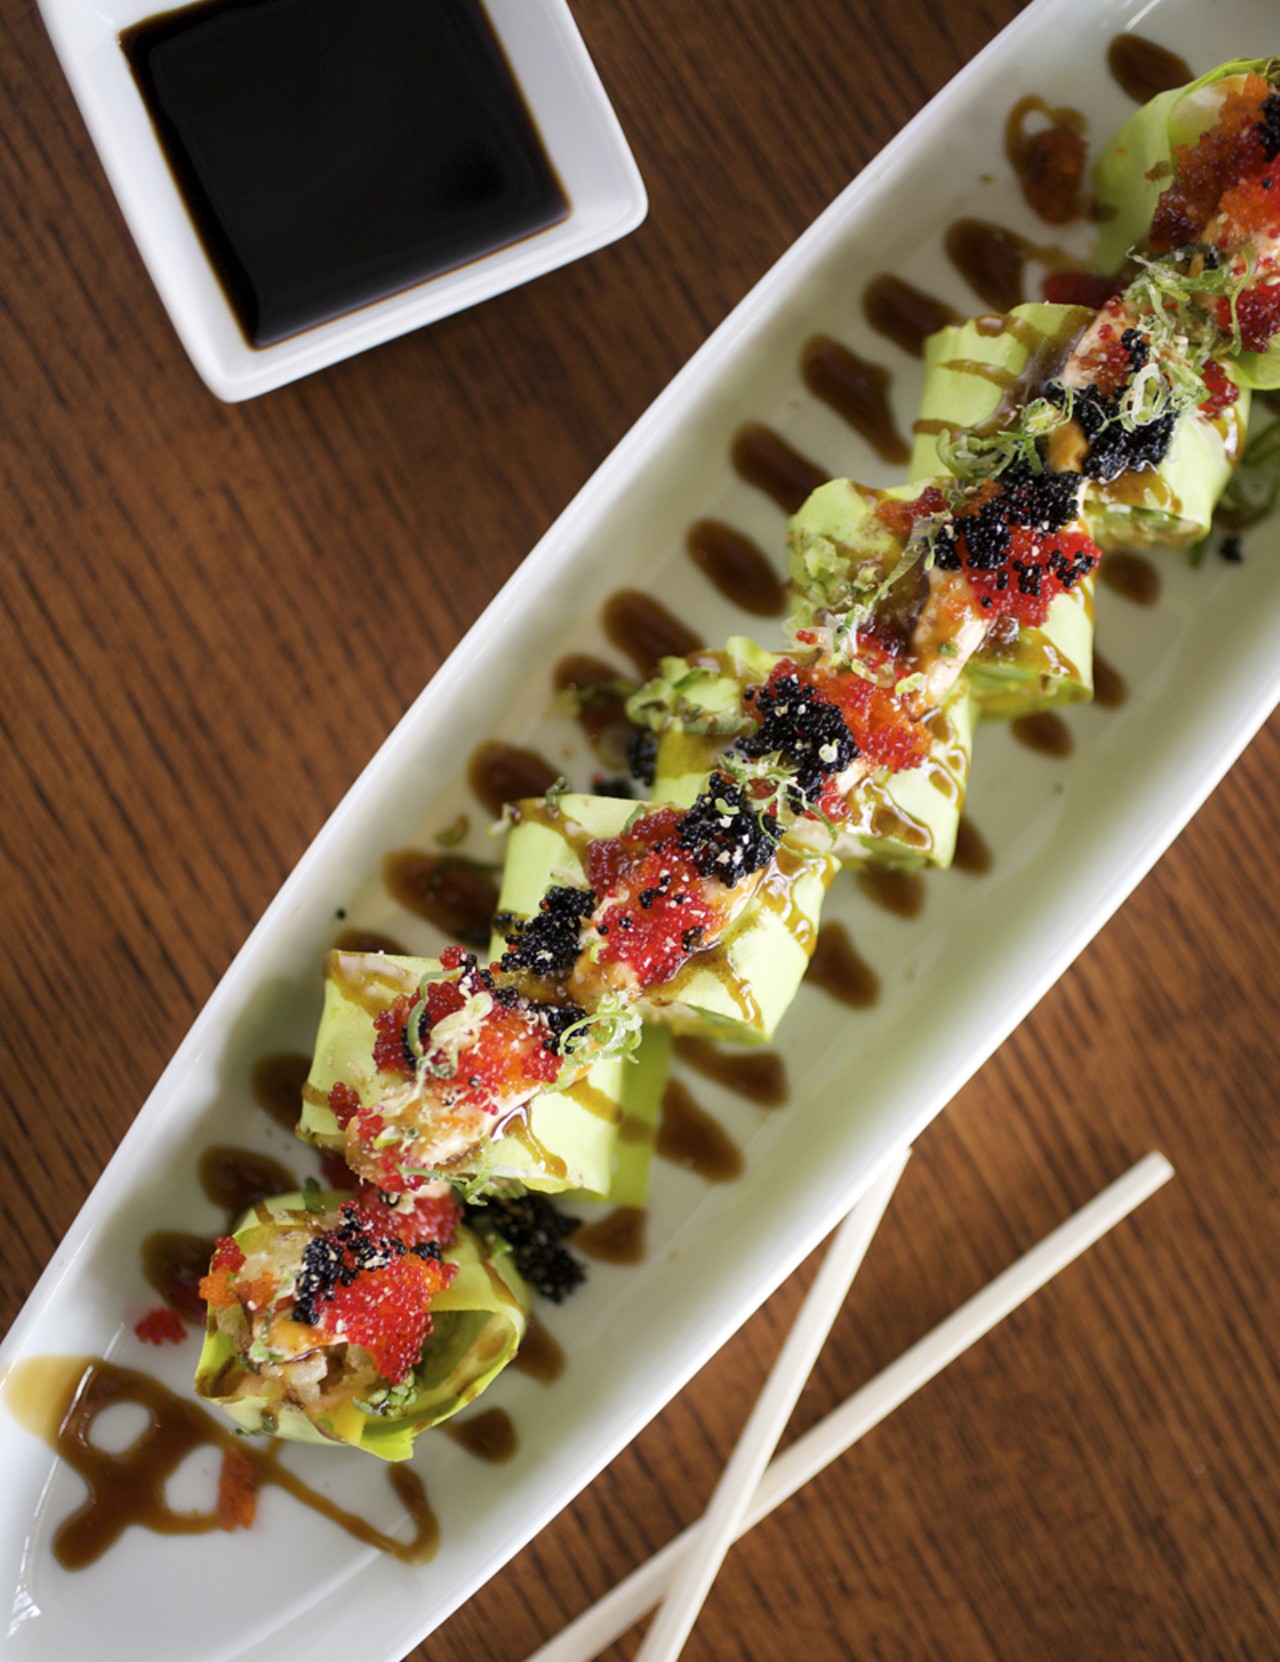 From the slideshow: Fin Japanese Cuisine